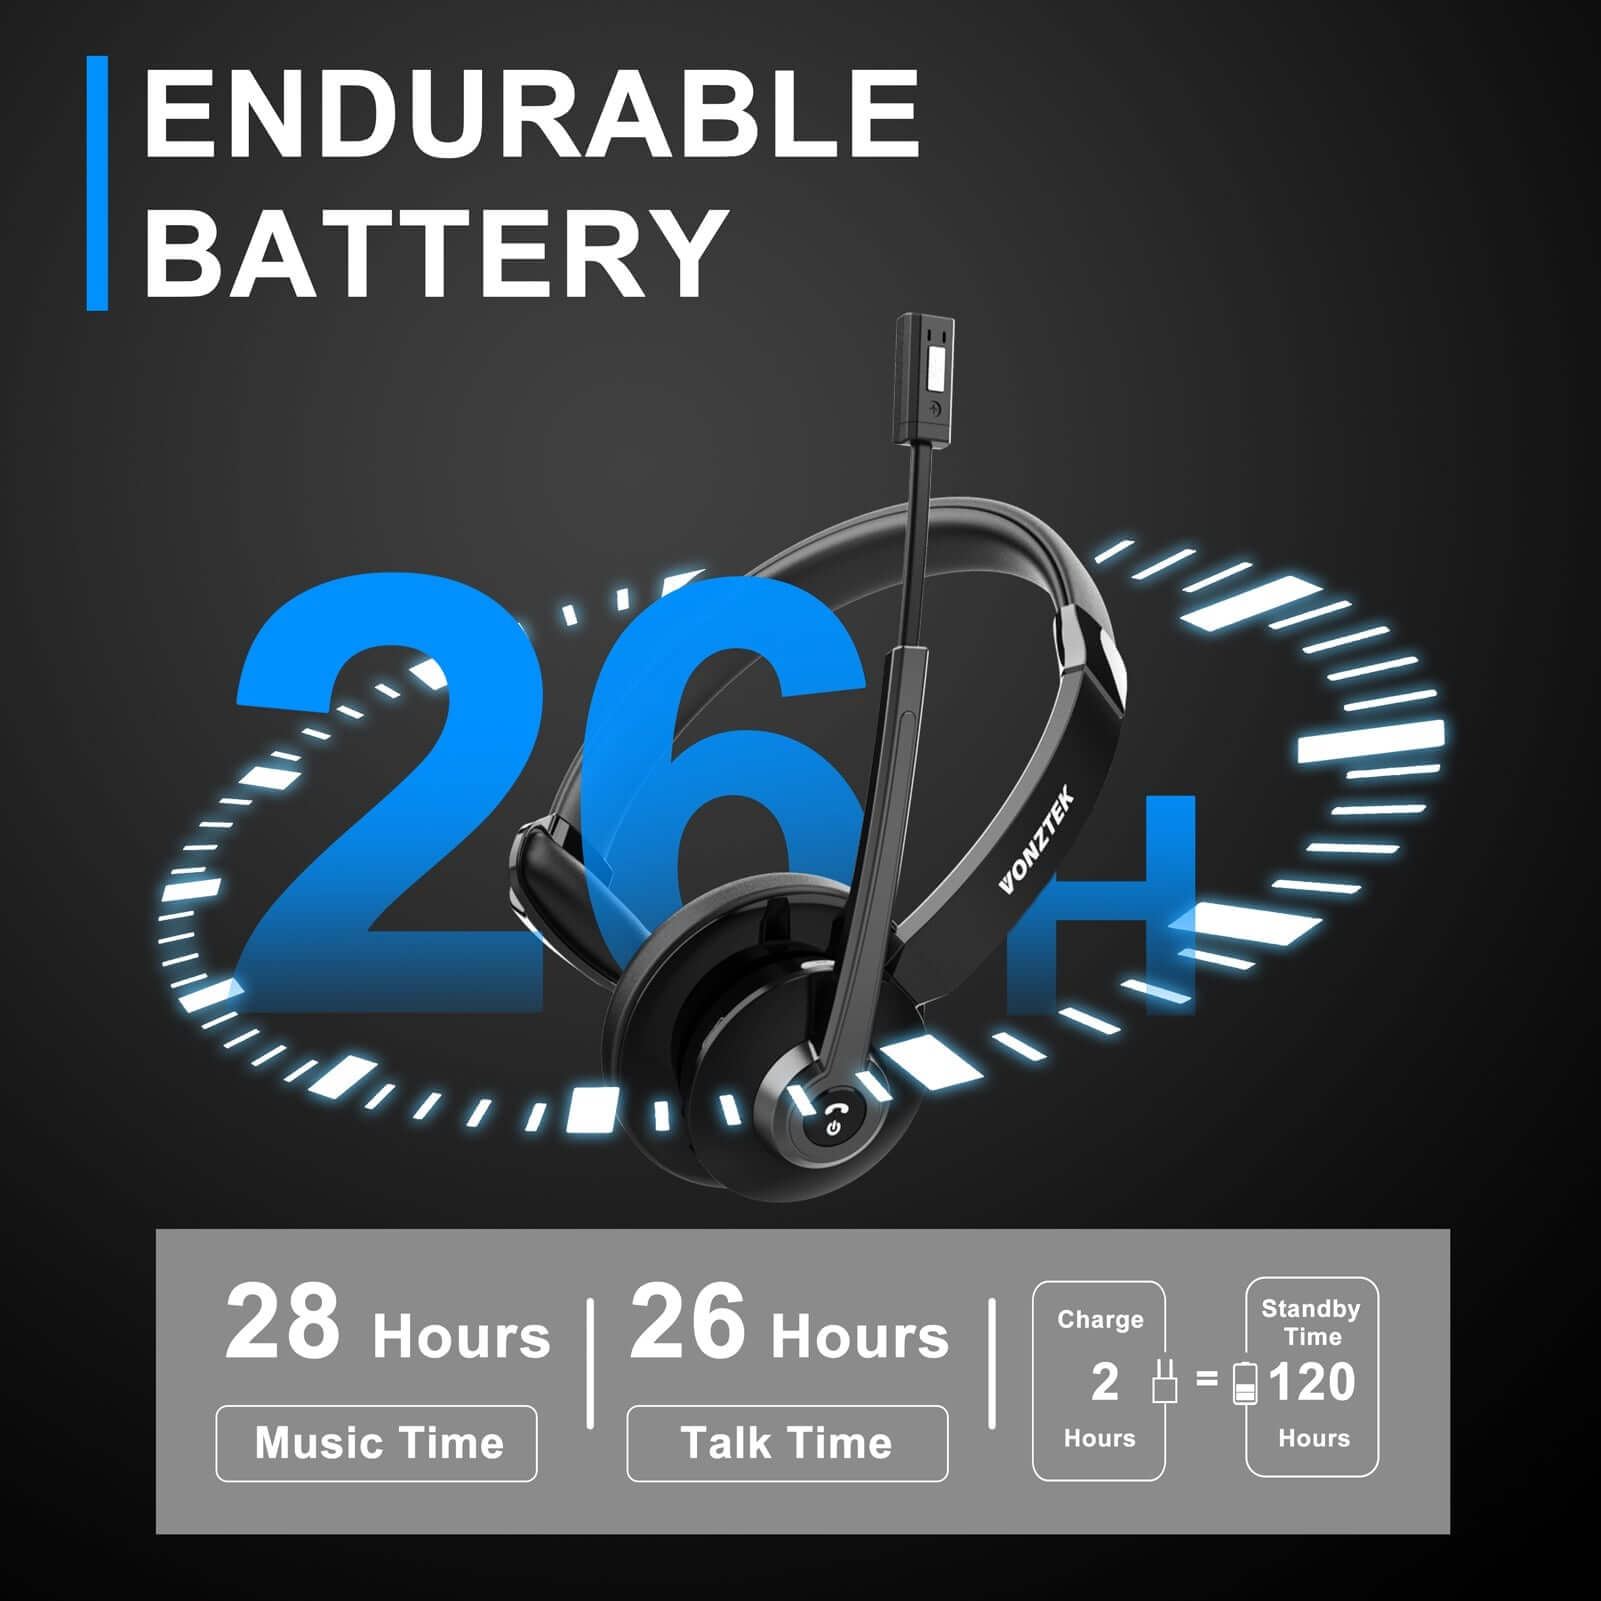 Endurable Battery, 28 Hours Music Time,26 Hours Talk Time,Charge 2 Hours = Standby Time 120 Houes.